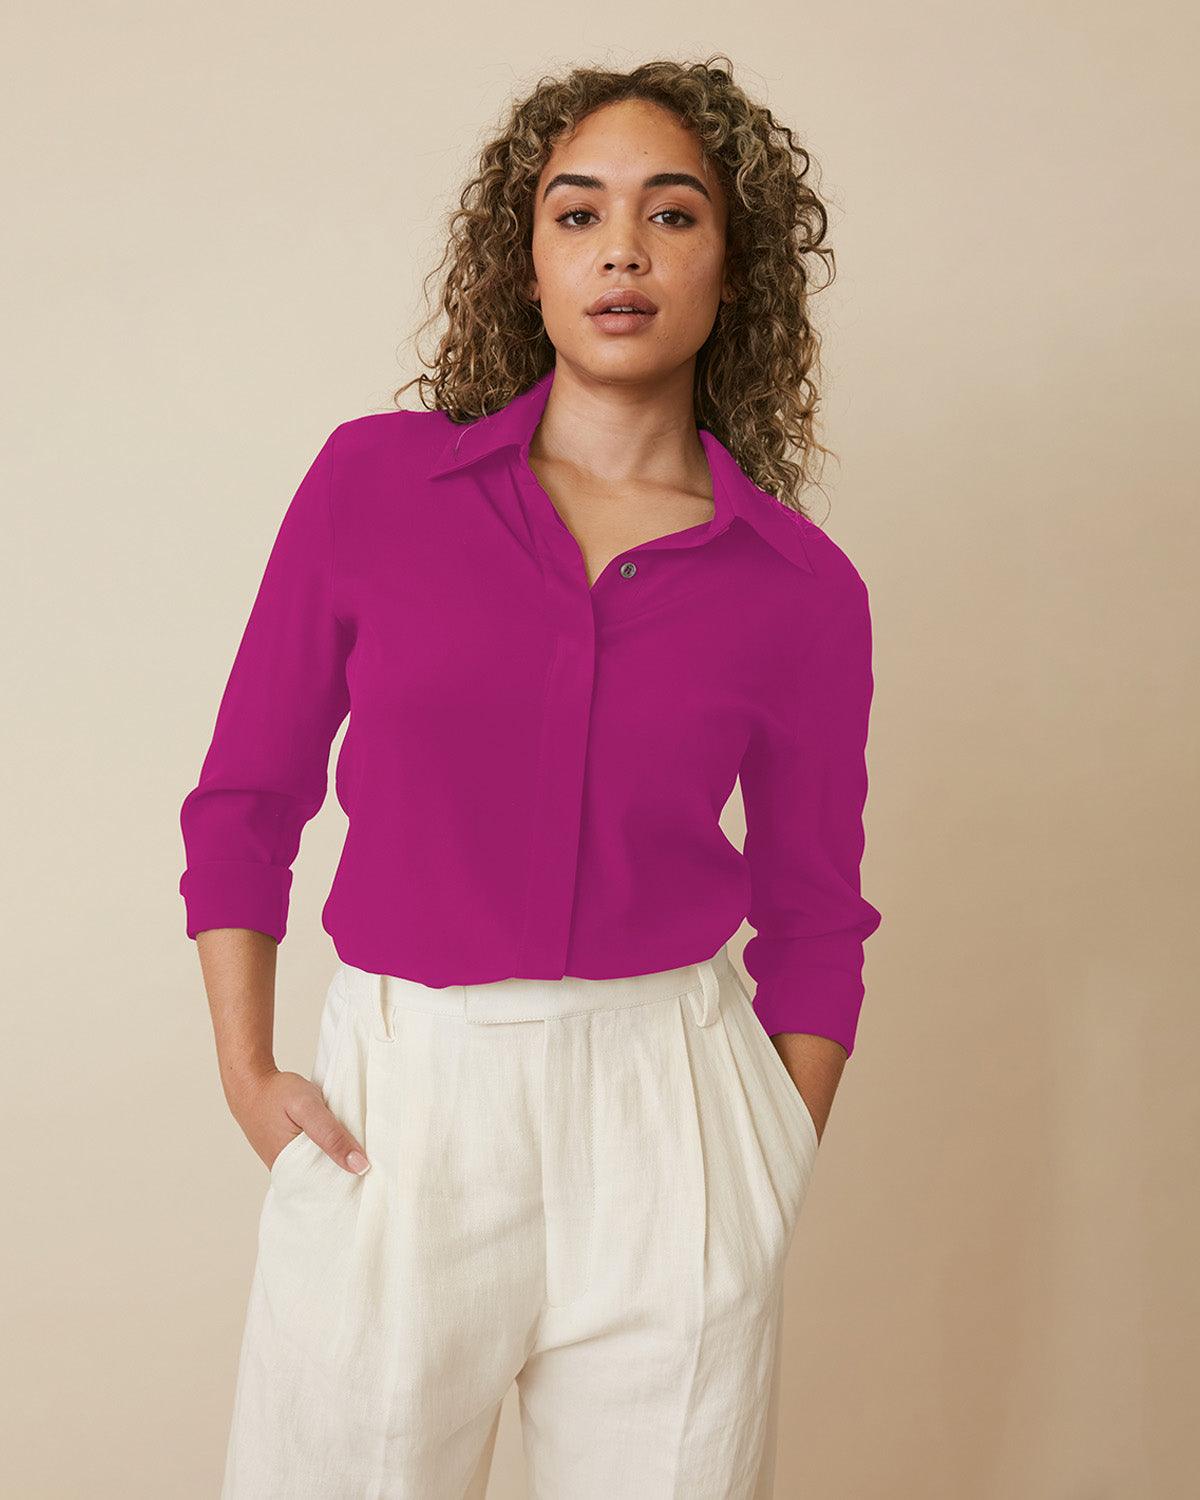 "#color_FUCHSIA|Zoe is 5'8", wearing a size M